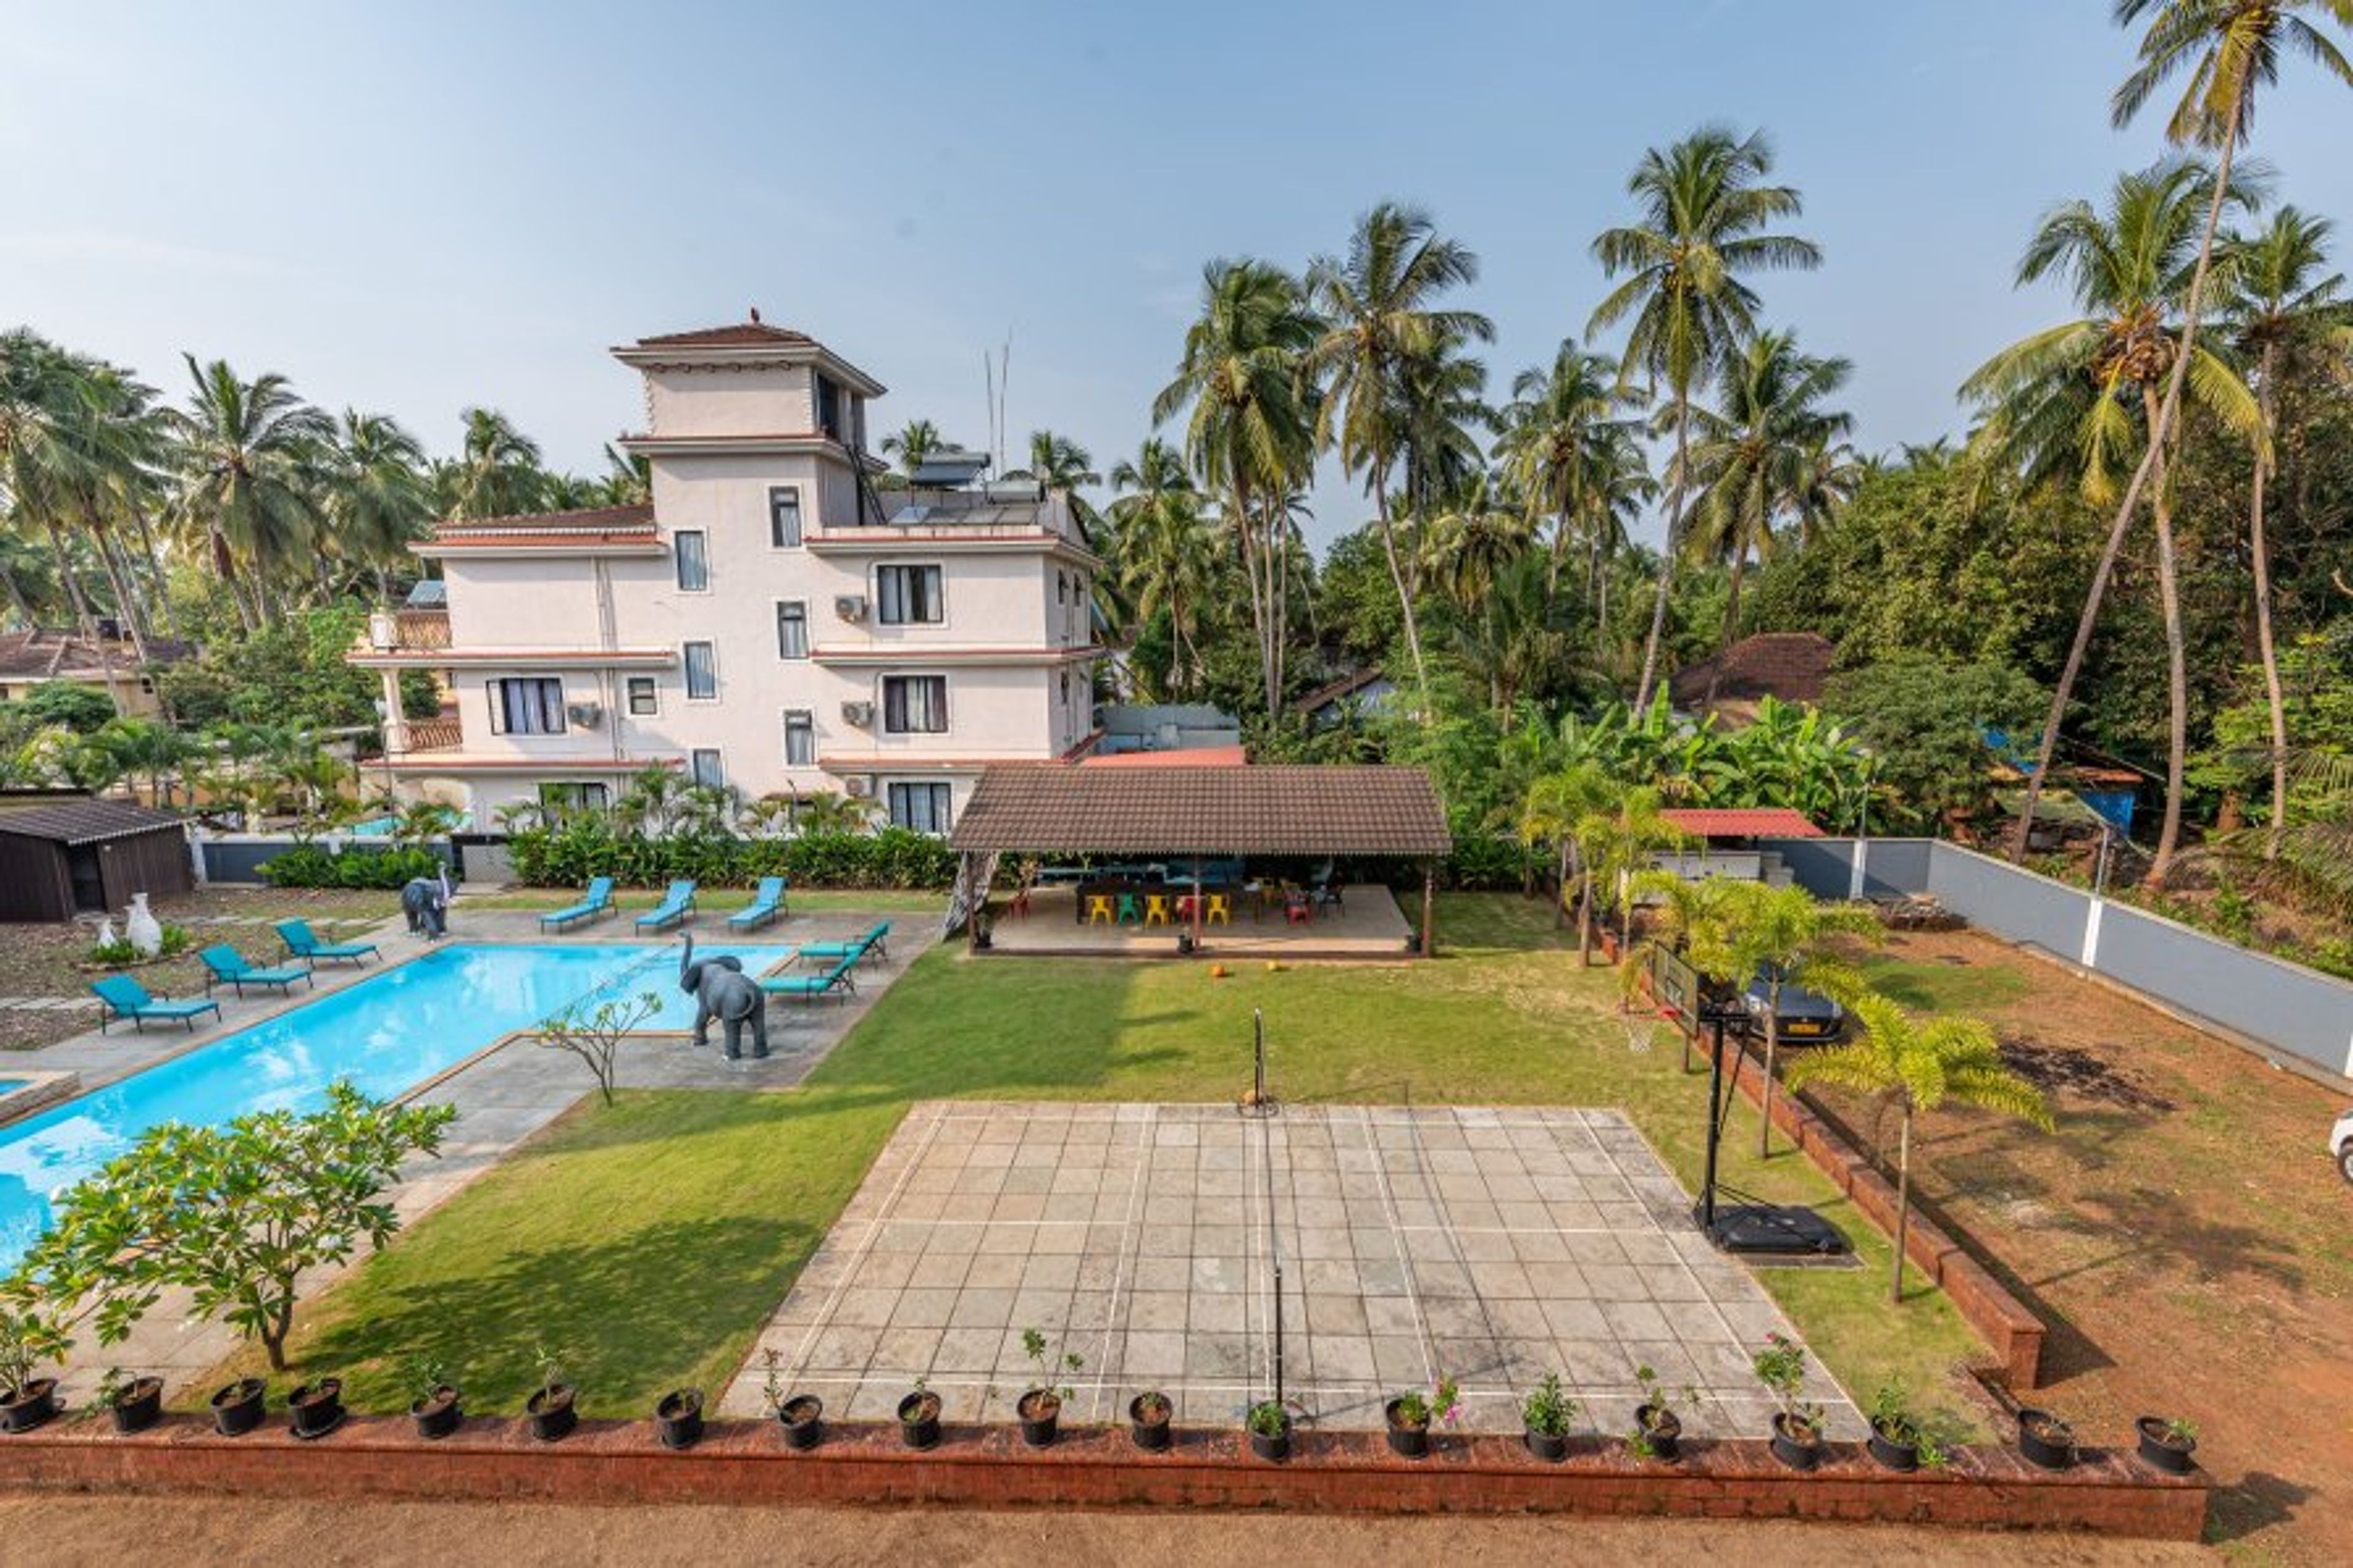 12 BHK villa with outdoor games